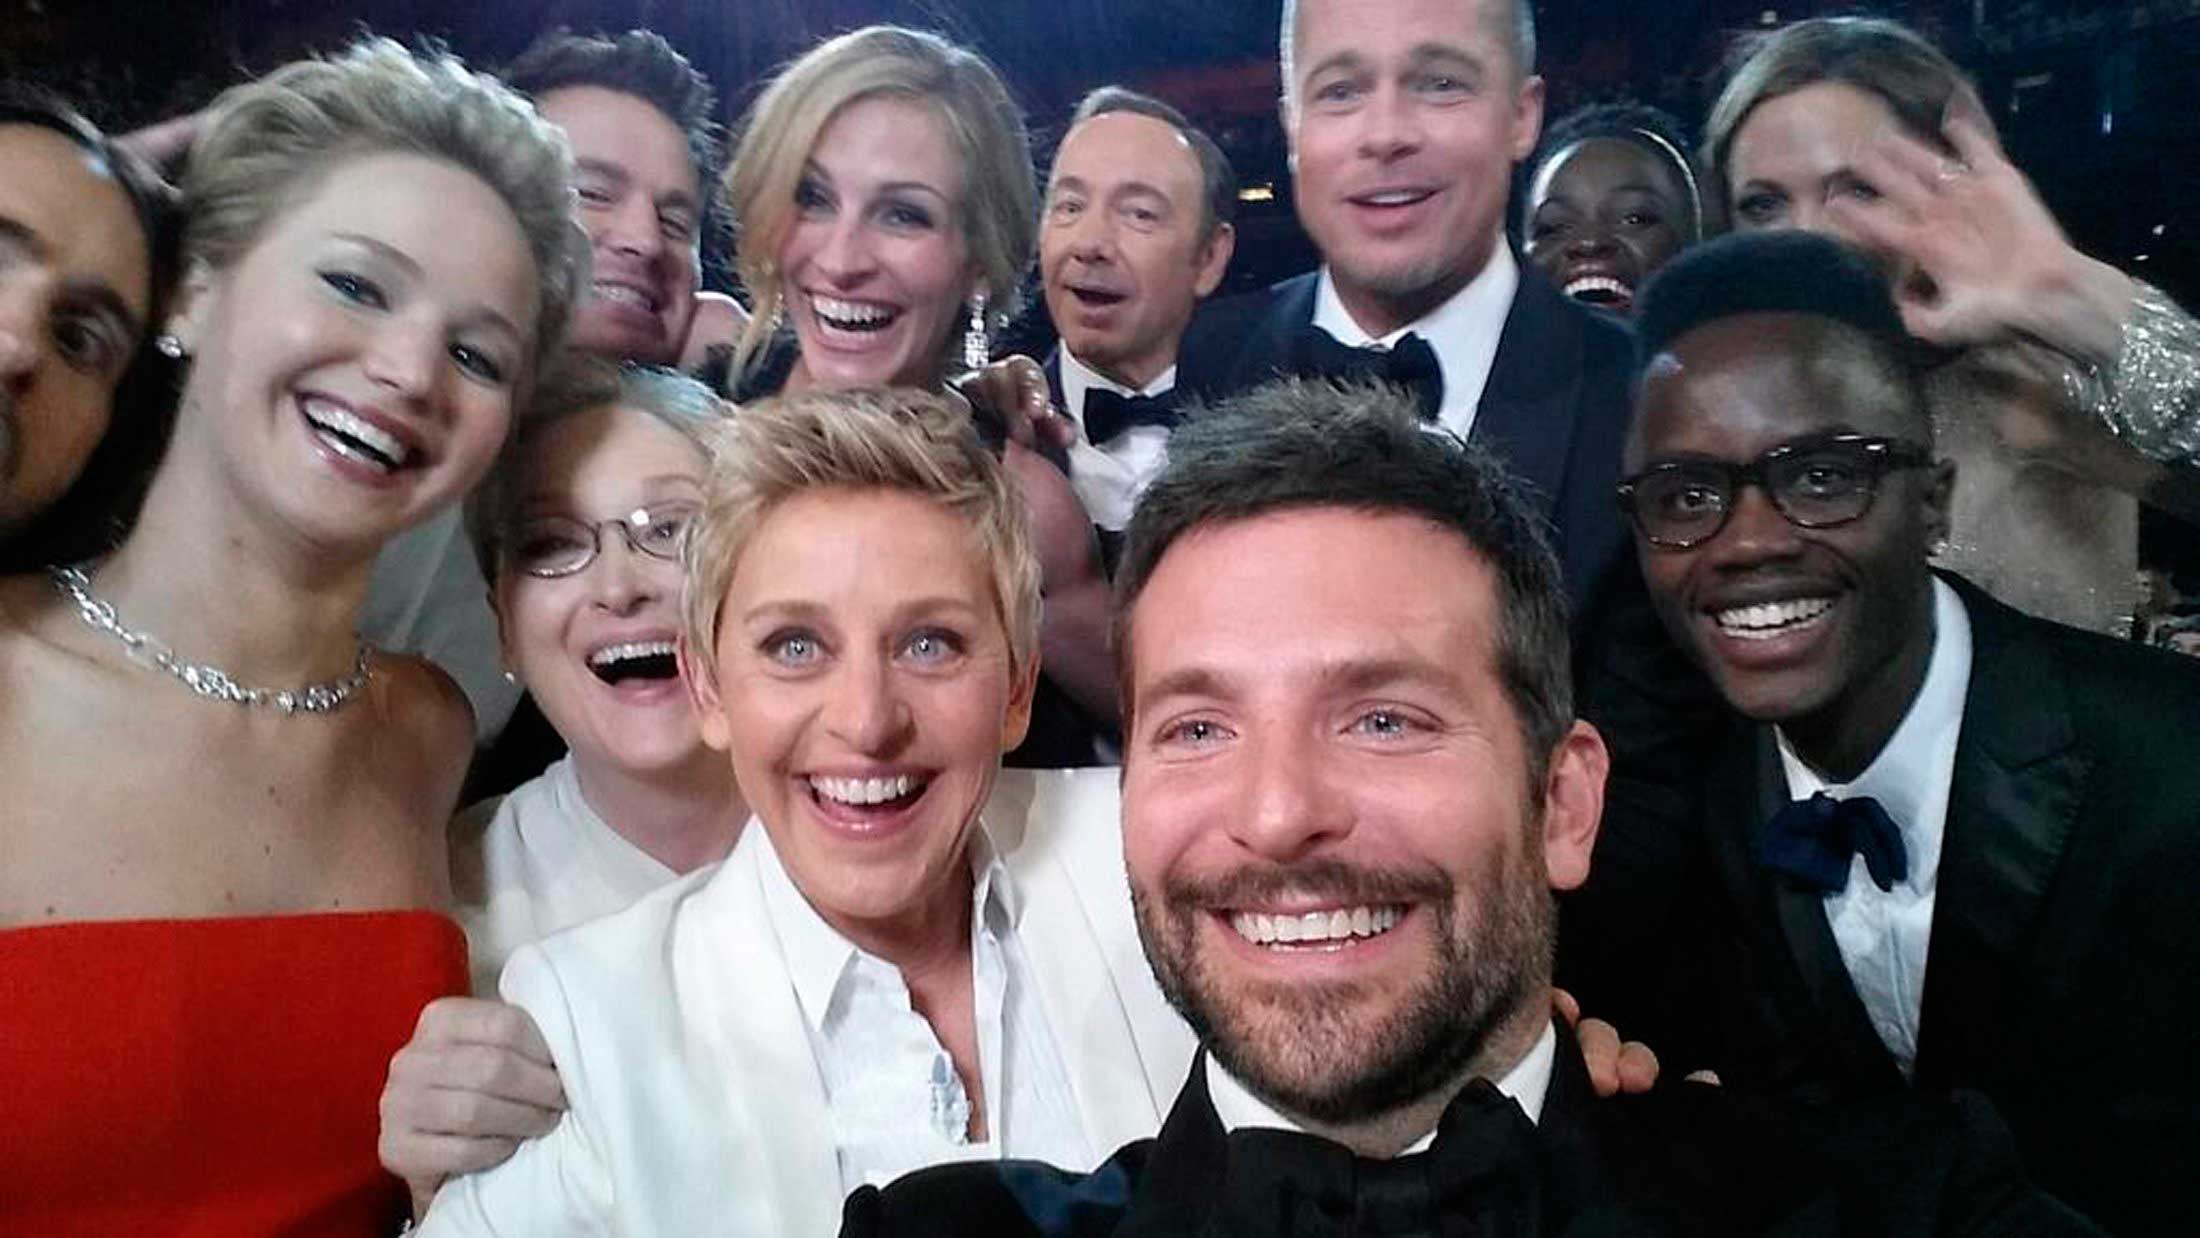 An image posted by Oscars show host Ellen DeGeneres on her Twitter account shows movie stars, including Jared Leto, Jennifer Lawrence, Meryl Streep, Channing Tatum, Julia Roberts, Kevin Spacey, Brad Pitt, Lupita Nyong'o, Angelina Jolie and Bradley Cooper as well as Nyong'o's brother Peter. March 2, 2014.